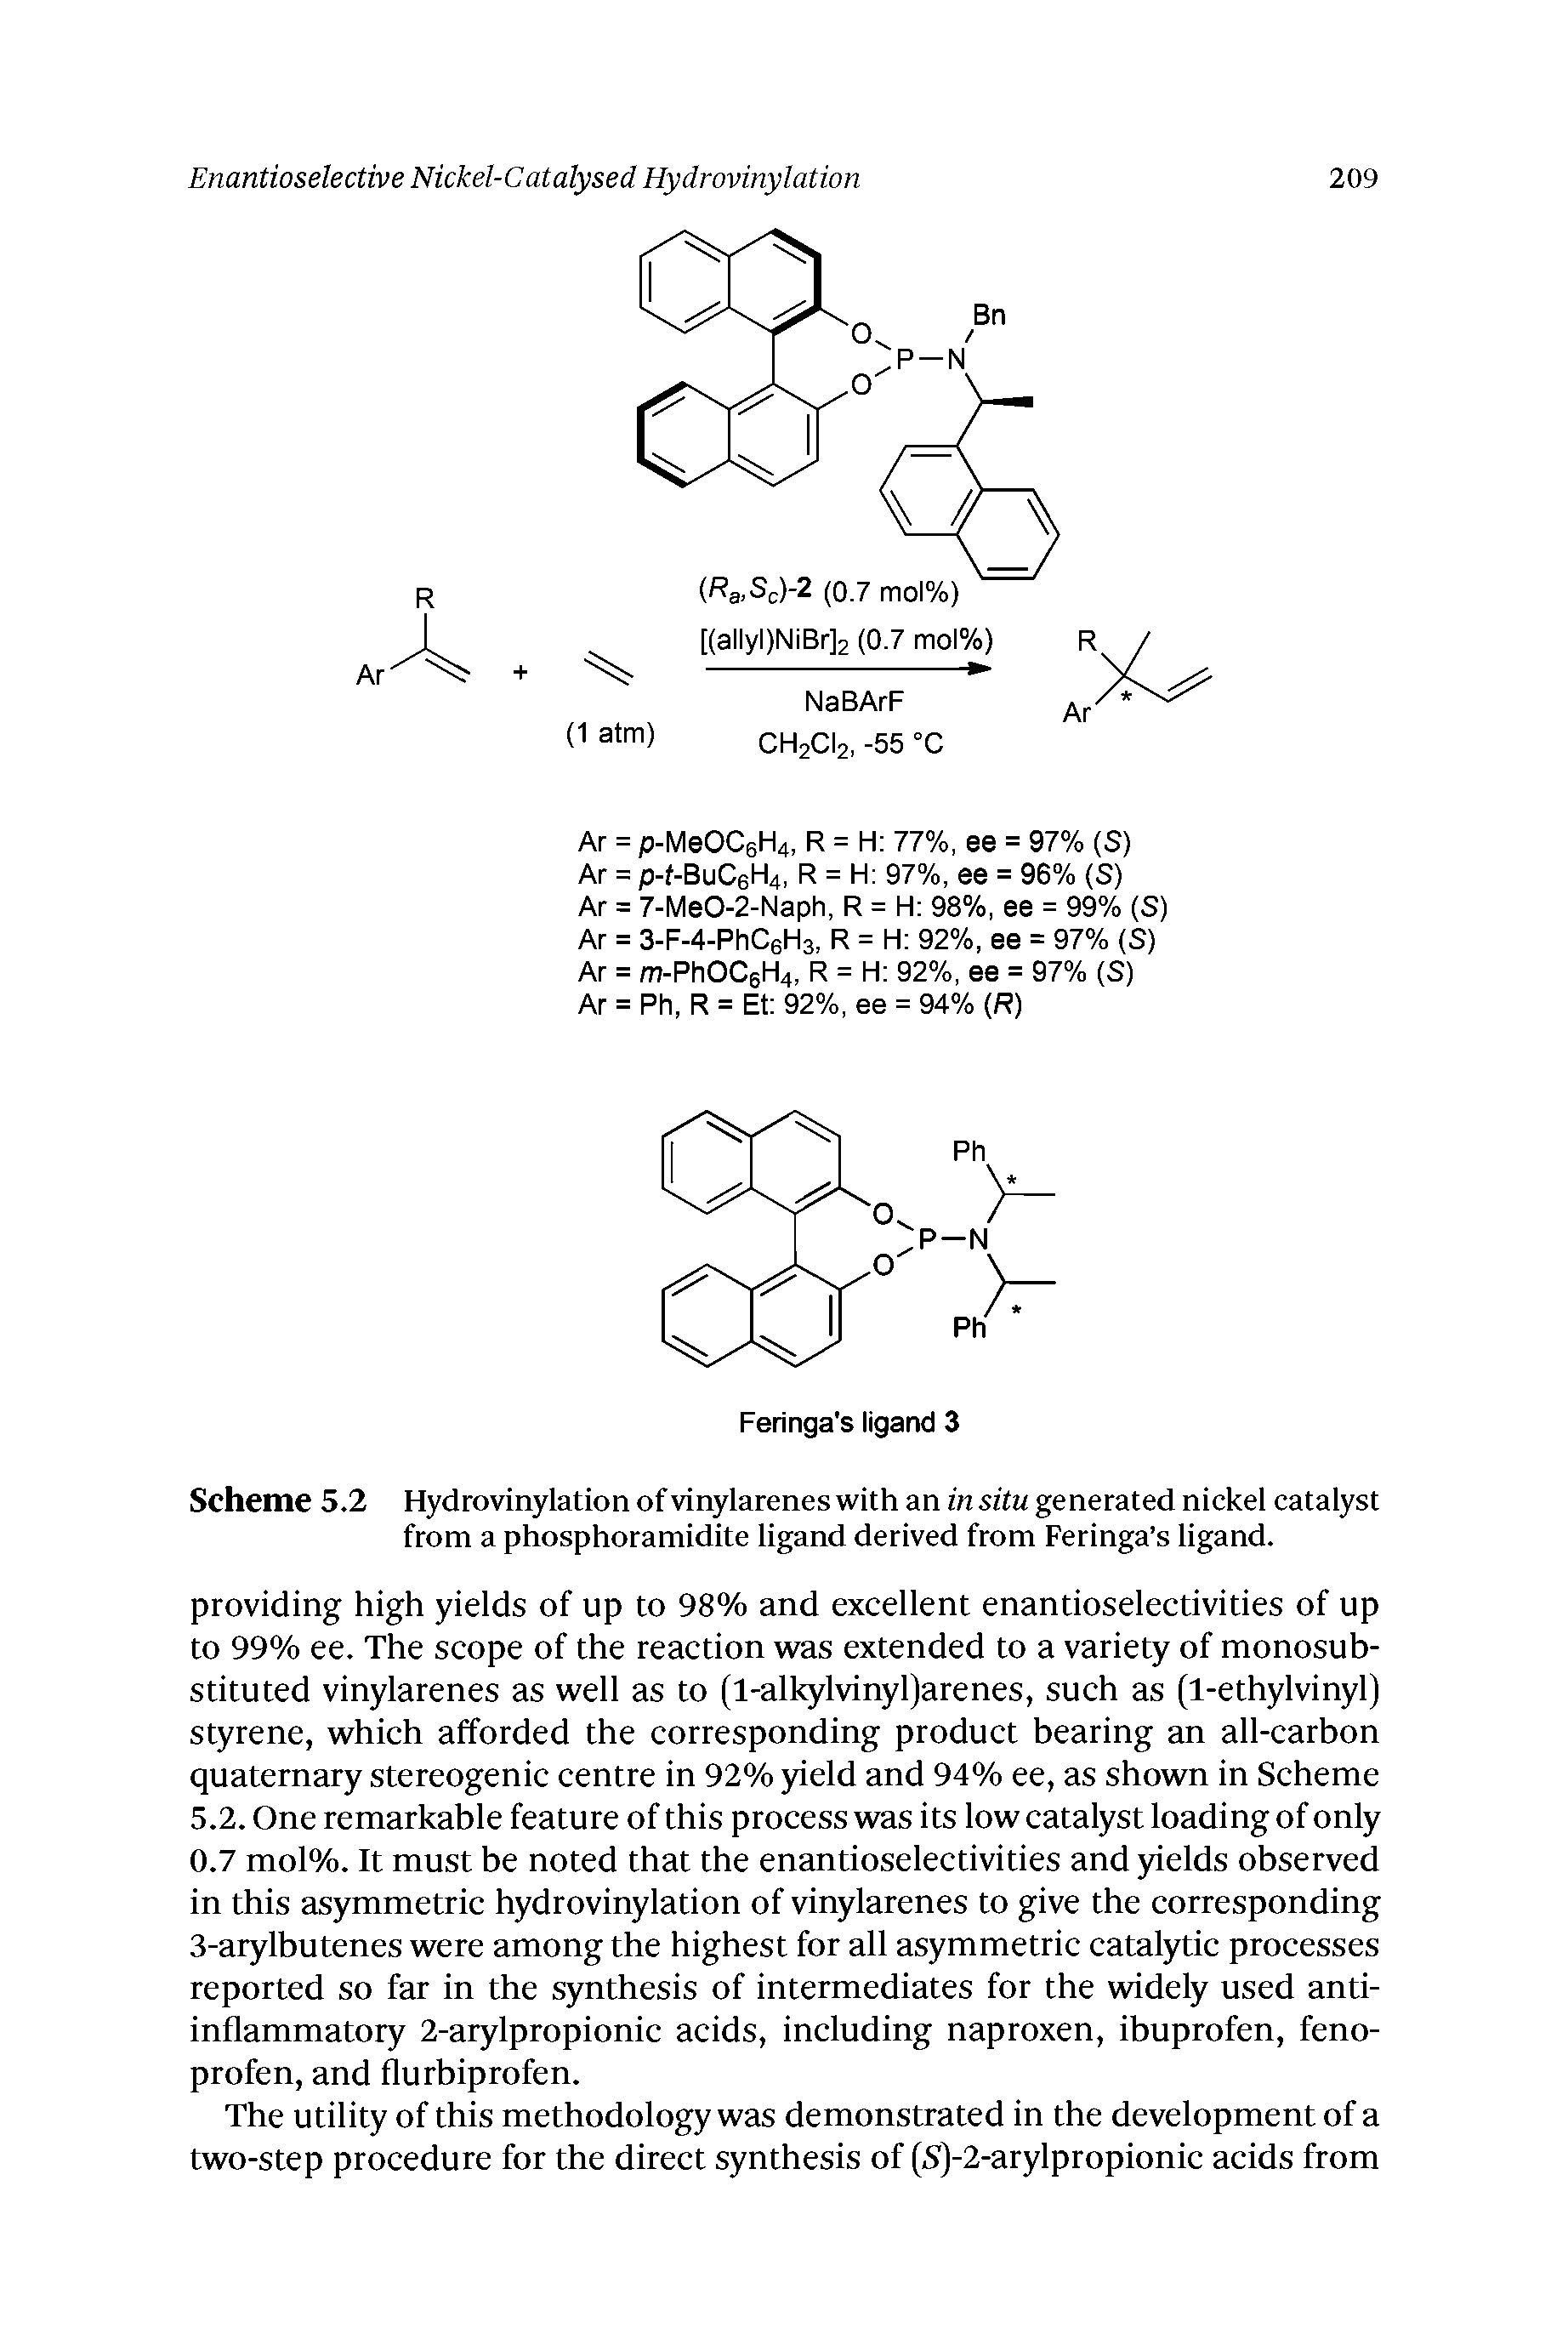 Scheme 5.2 Hydrovinylation of vinylarenes with an in situ generated nickel catalyst from a phosphoramidite ligand derived from Feringa s ligand.